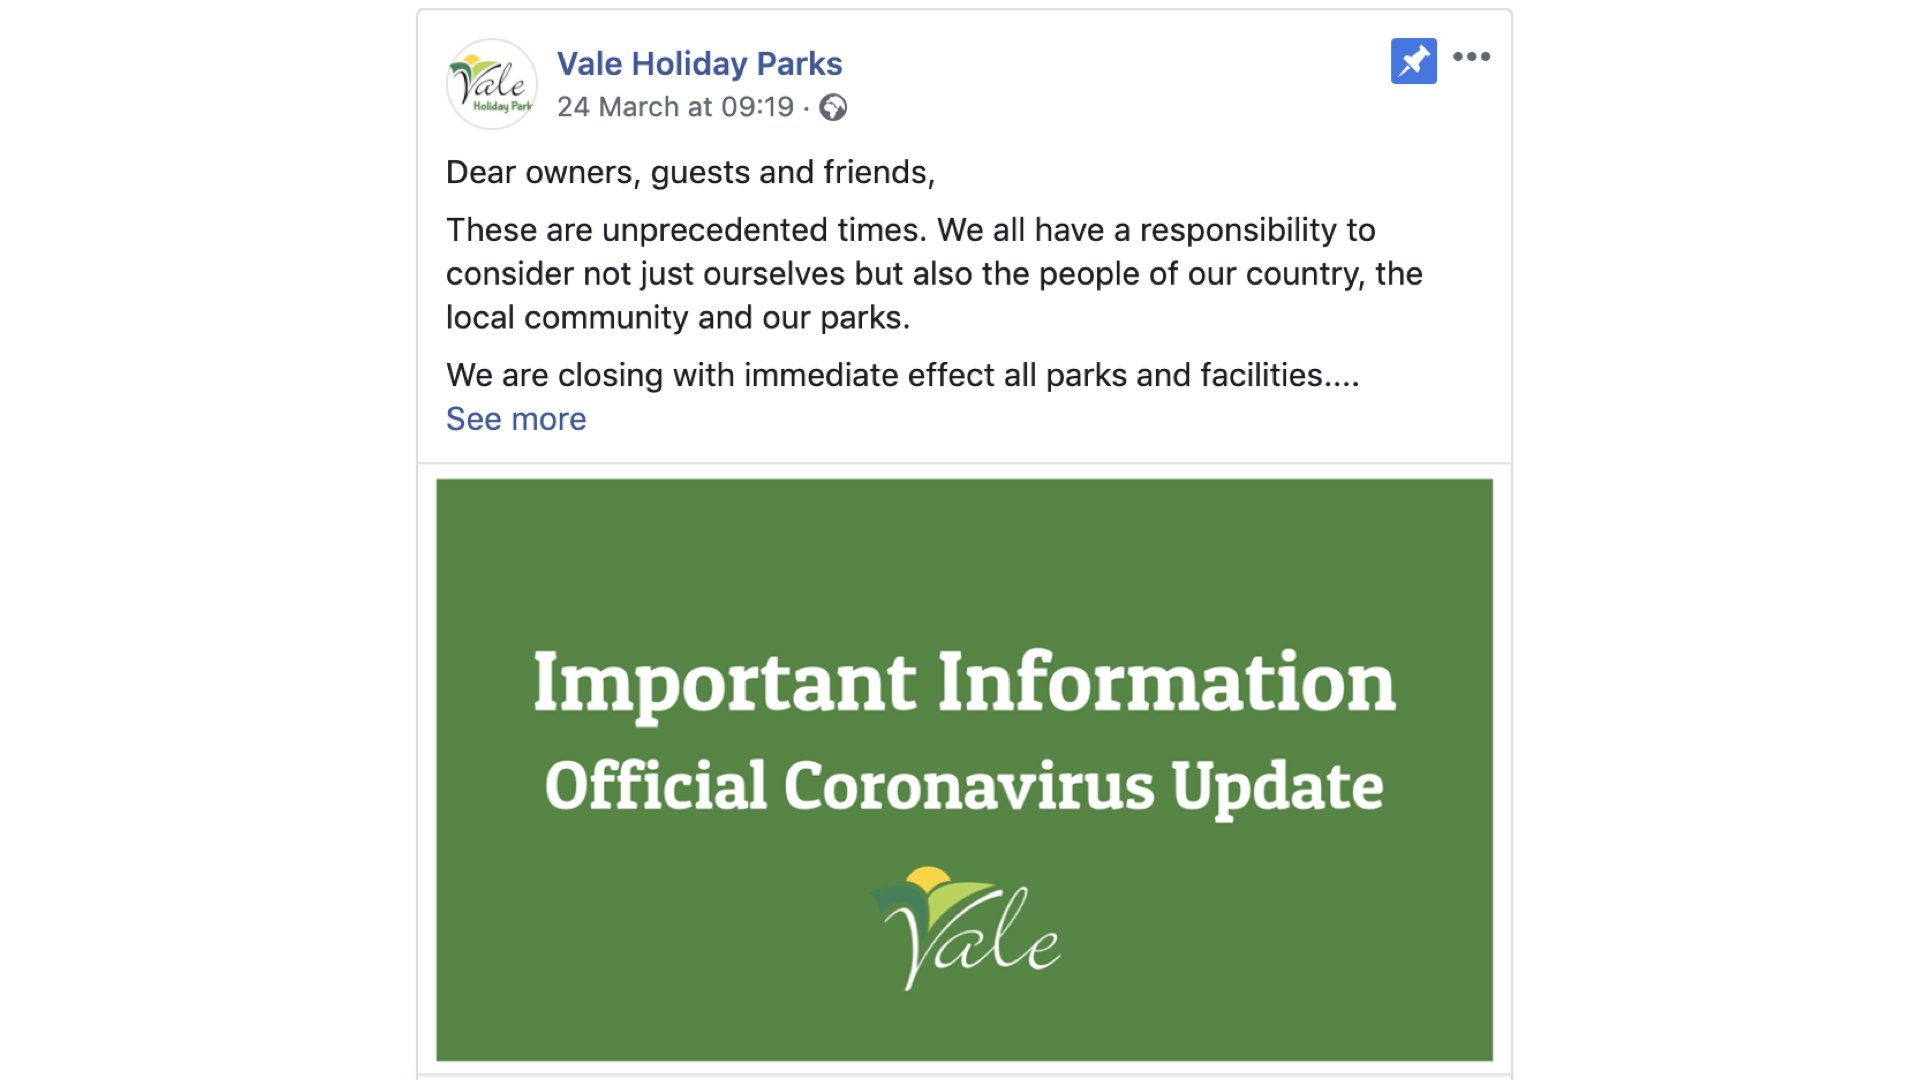 Vale Holiday Parks Facebook post